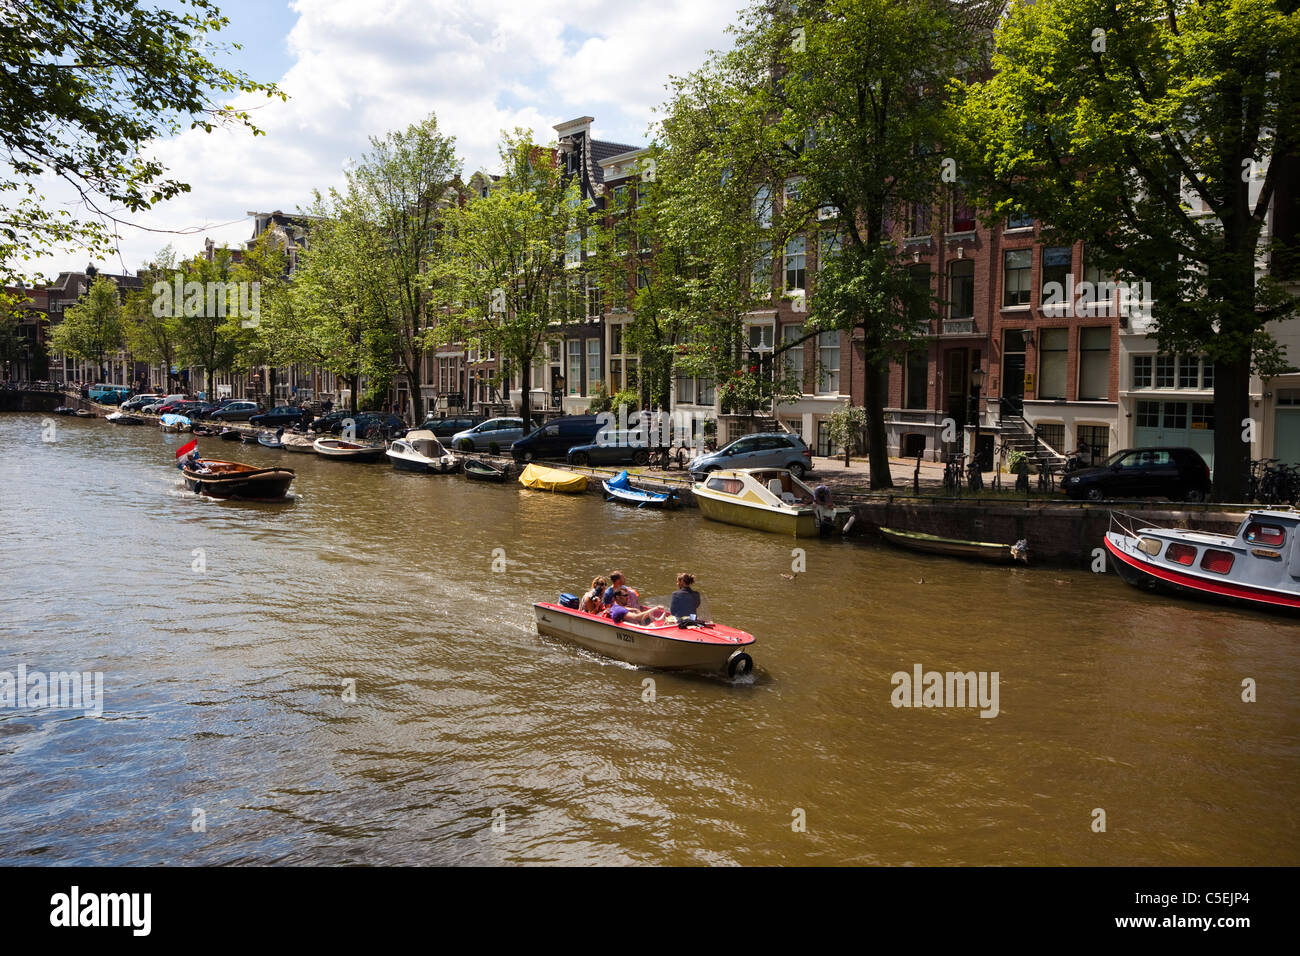 Small motor boats sailing on a canal, Amsterdam, Holland Stock Photo